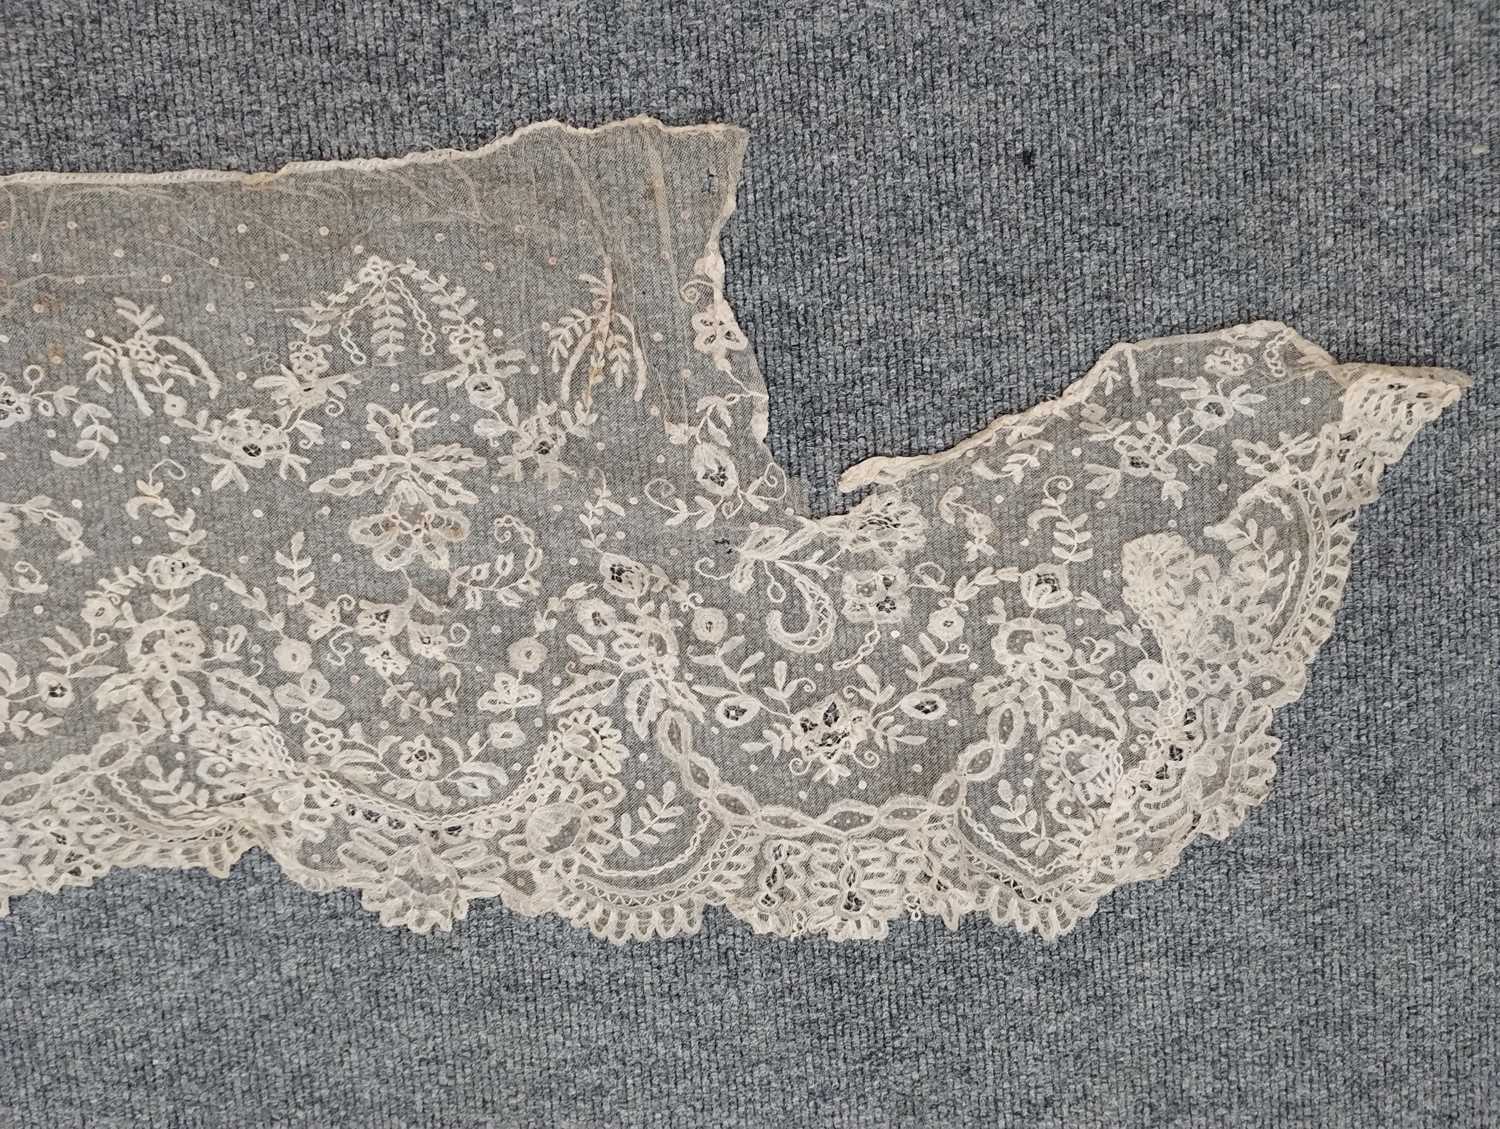 Early 20th Century Lace comprising a flounce with appliquéd flower heads and motifs within a - Image 25 of 32